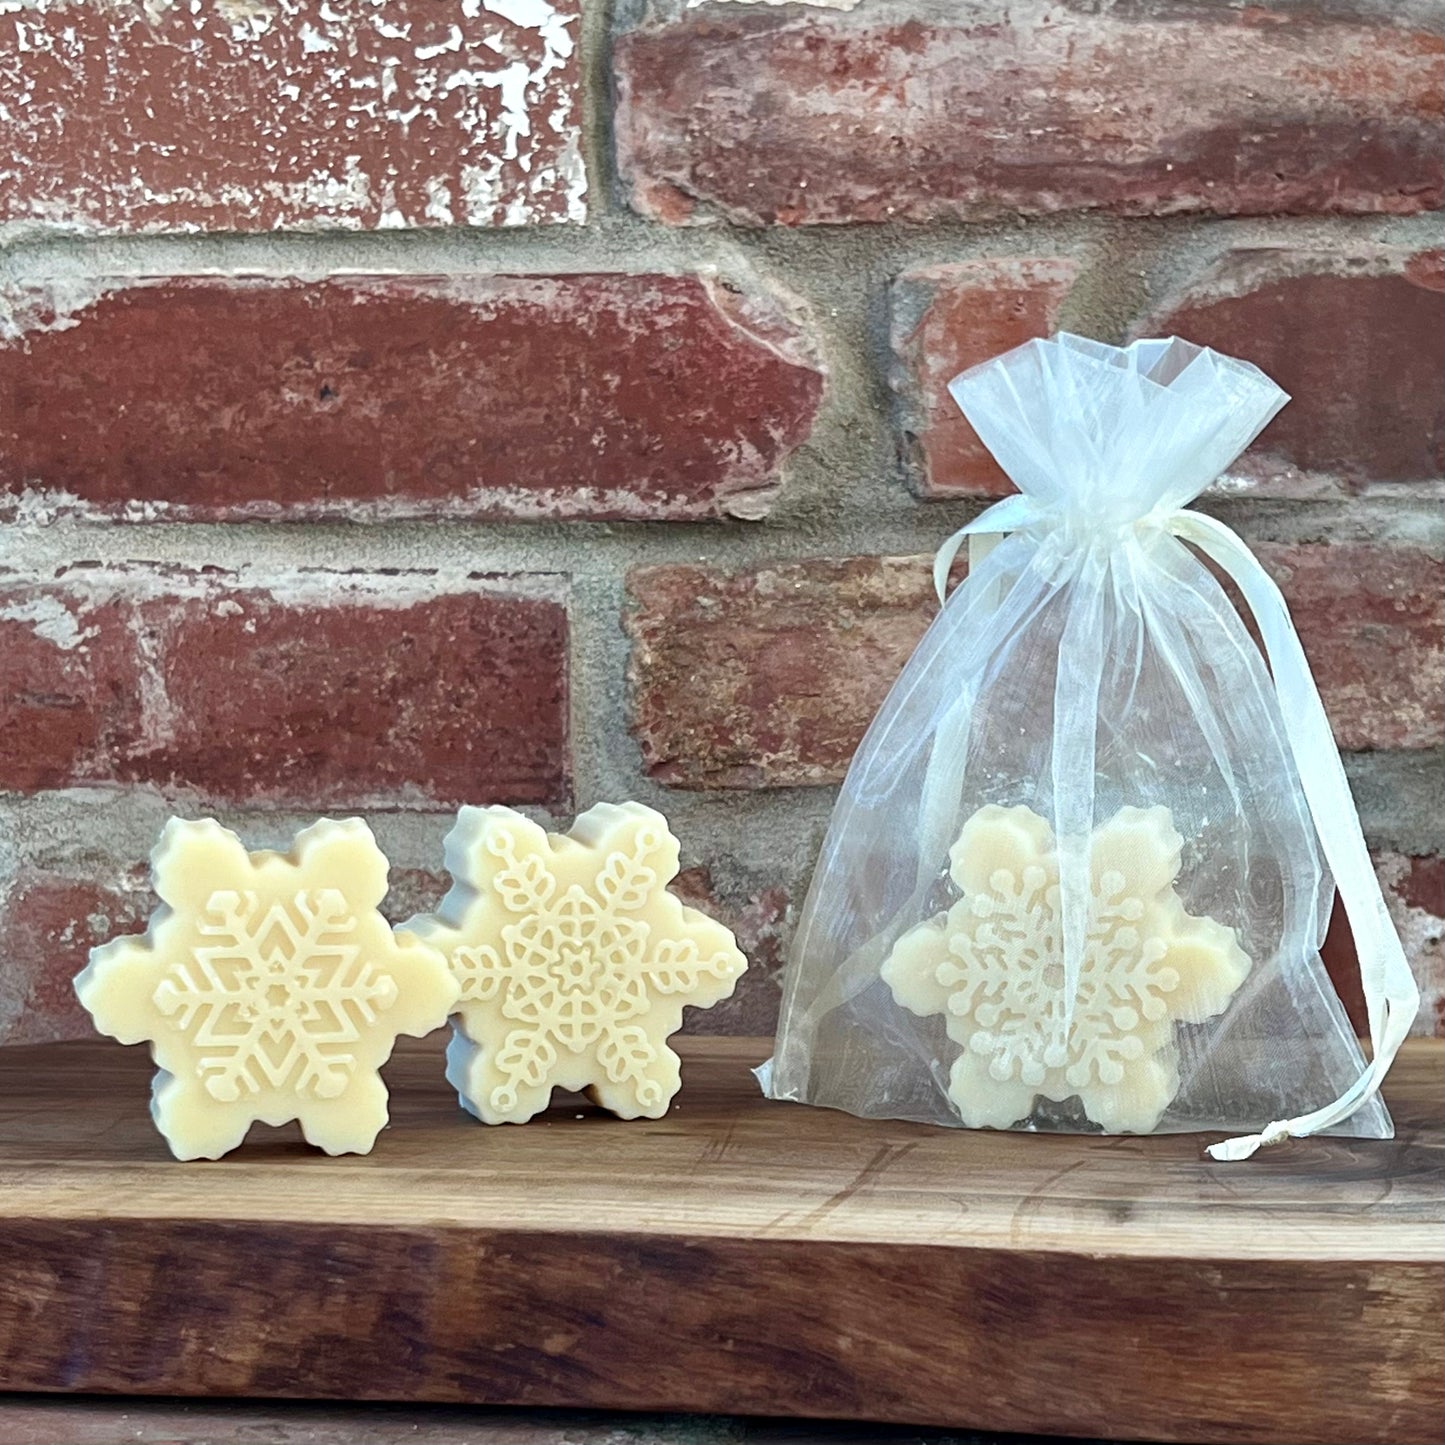 Simply Ewe - Snowflake-Shaped Essential Oil Scented Sheep's Milk Soap